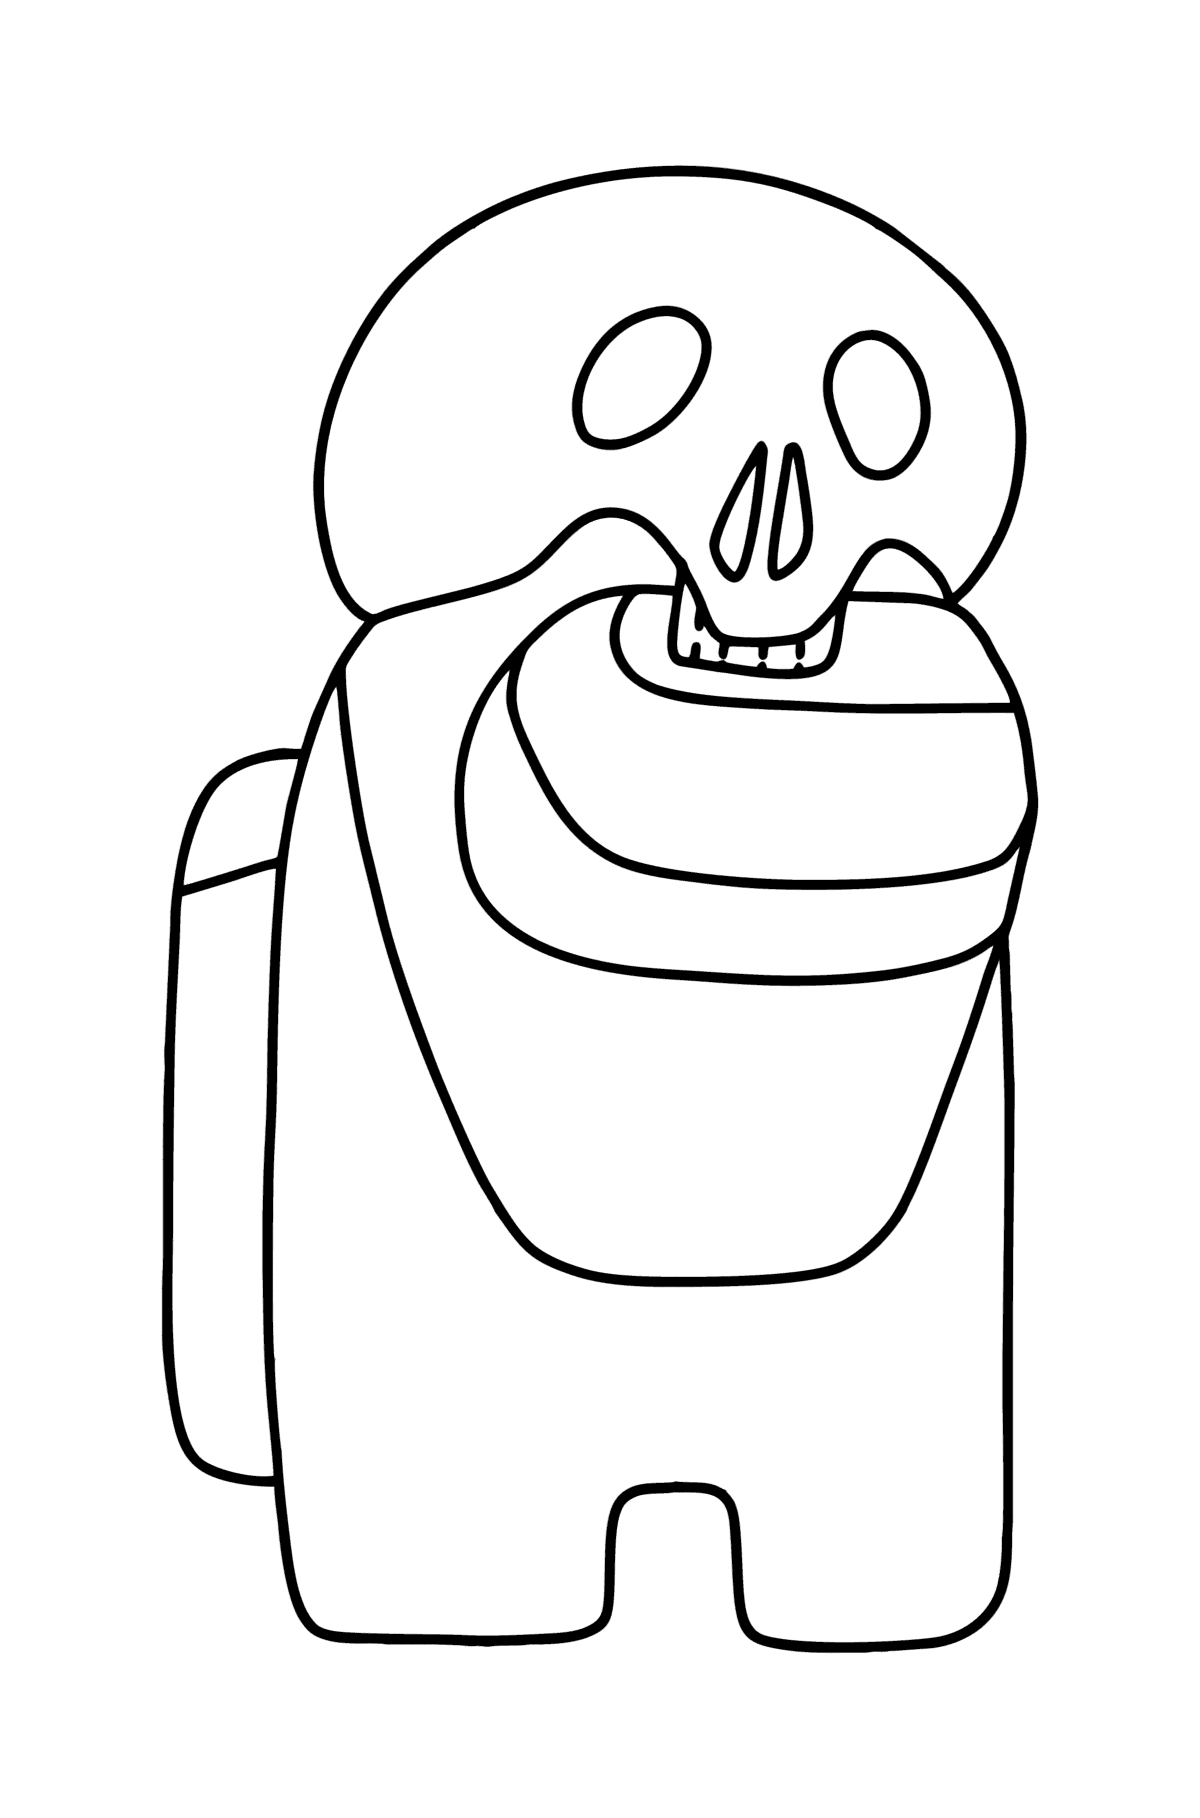 Among Us coloring page - Skull - Coloring Pages for Kids